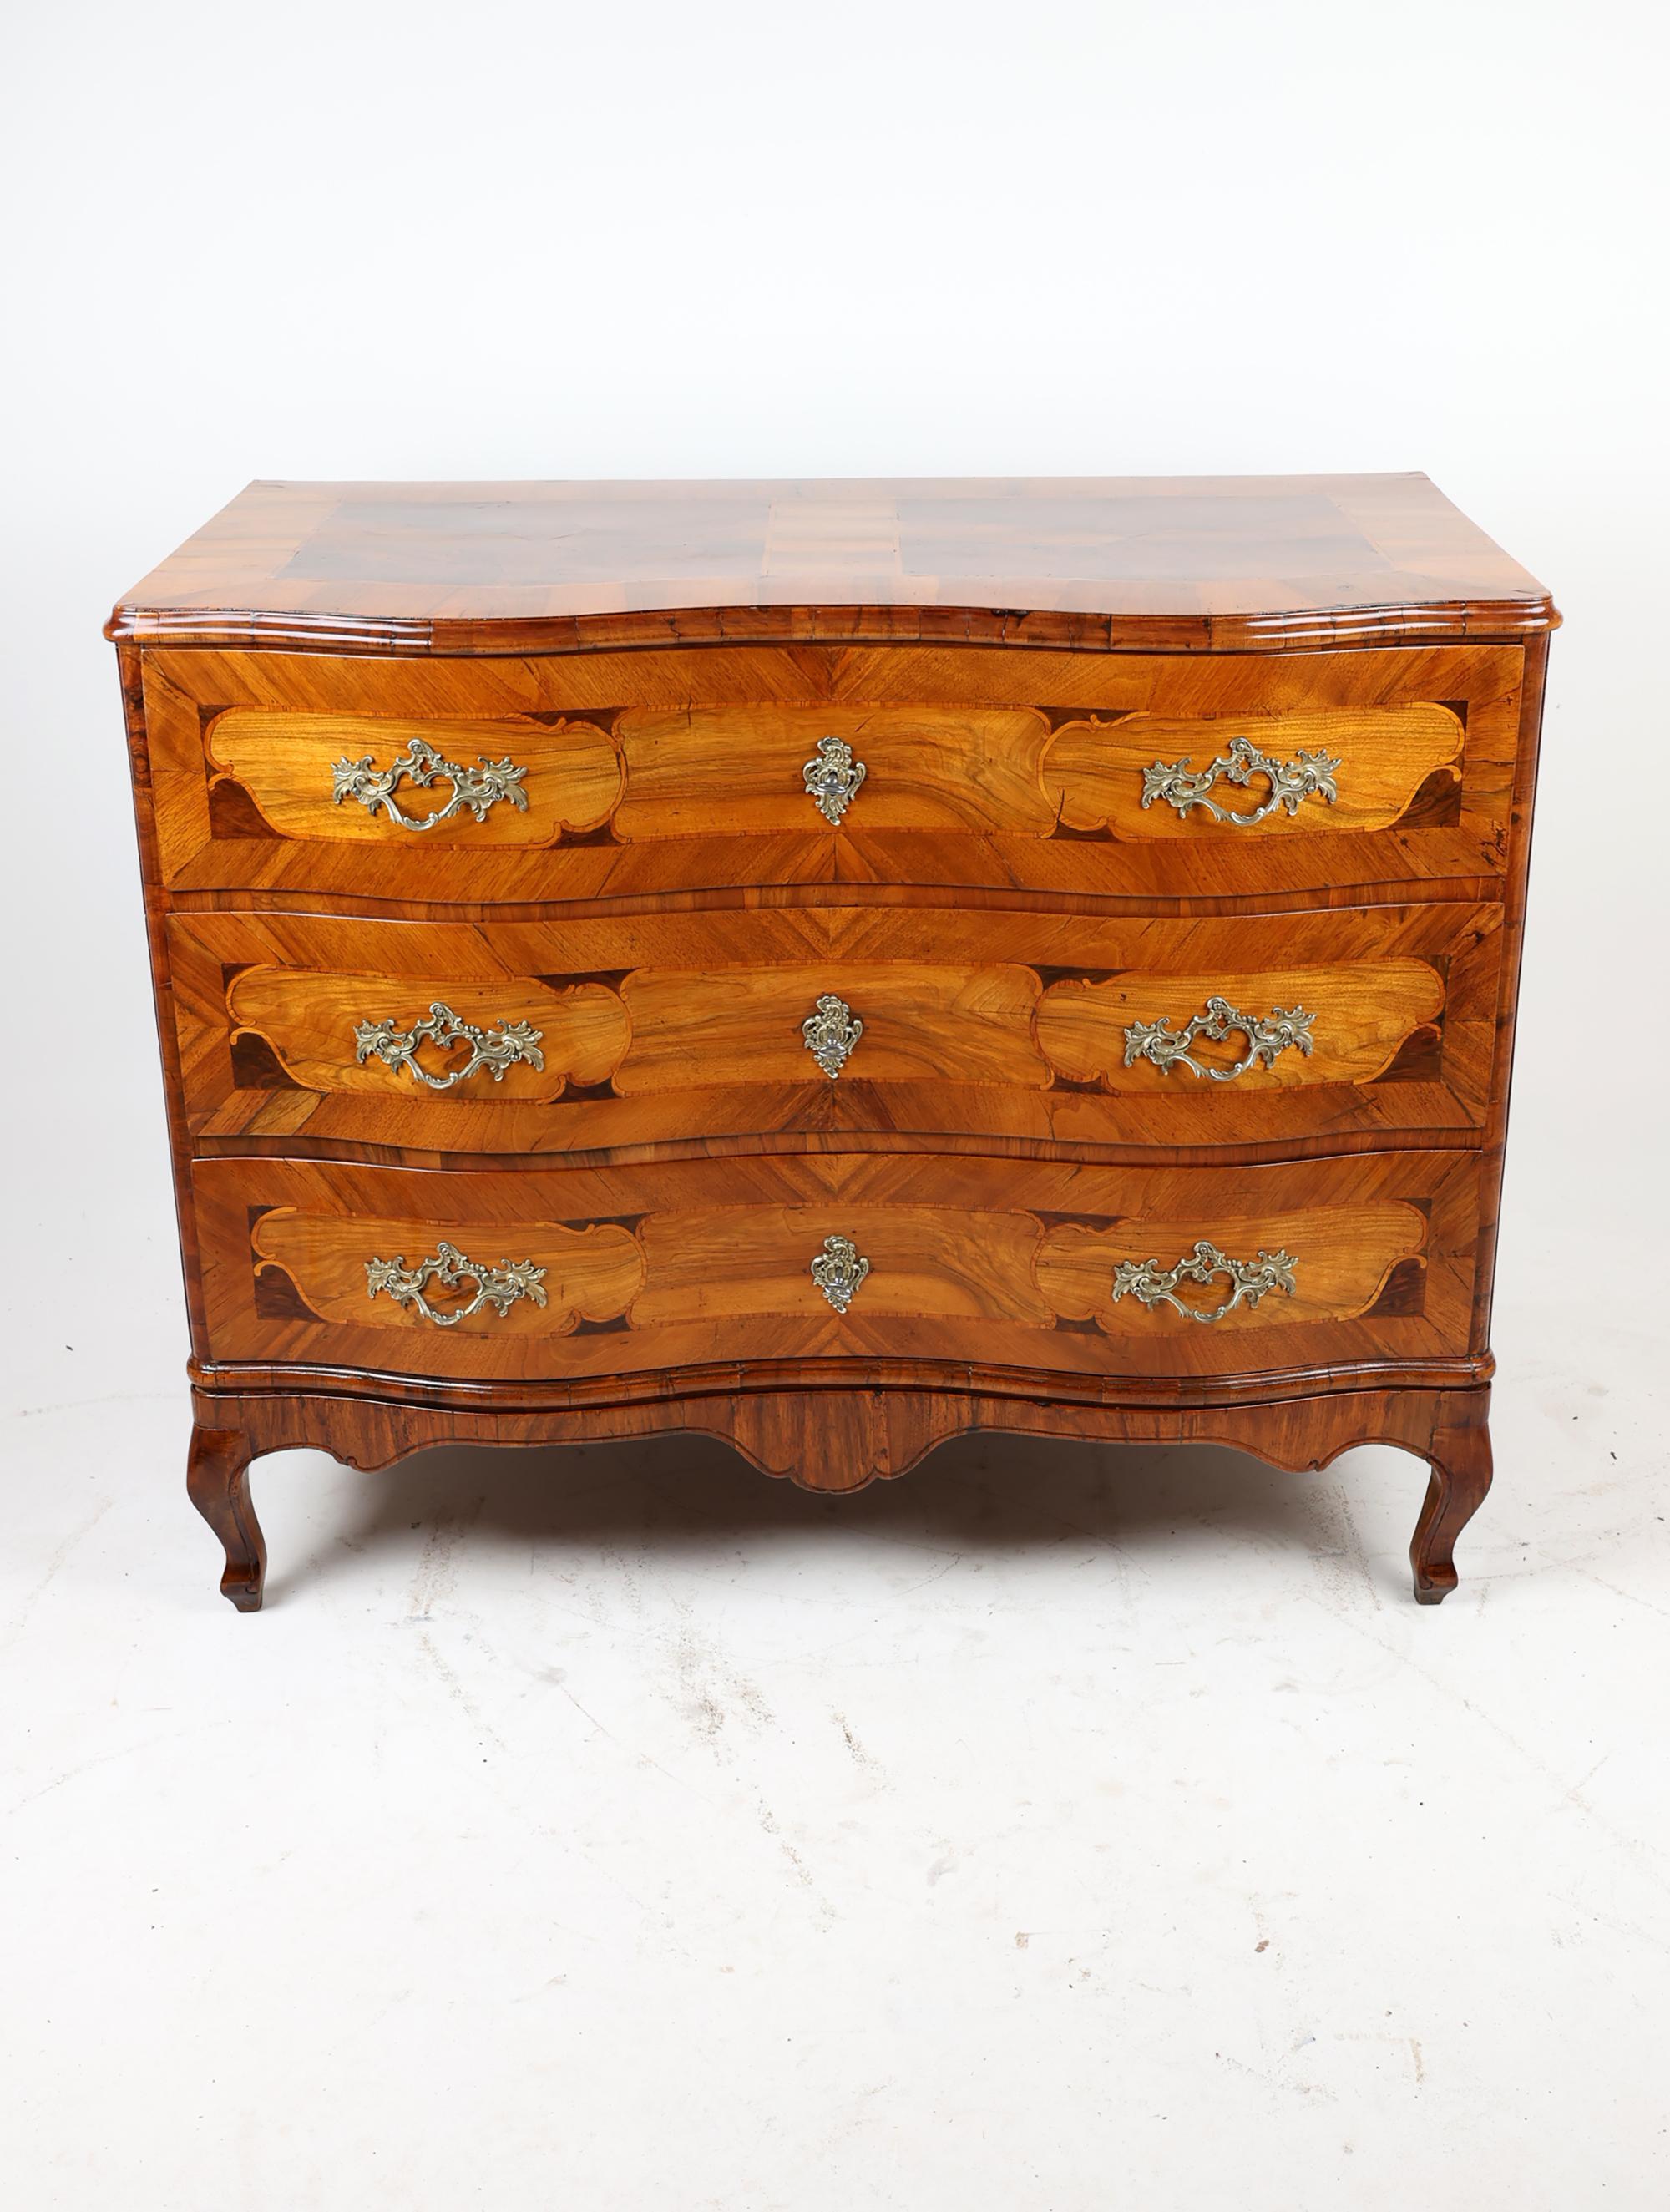 Late 18th Century Baroque Commode with Burl Walnut For Sale 10